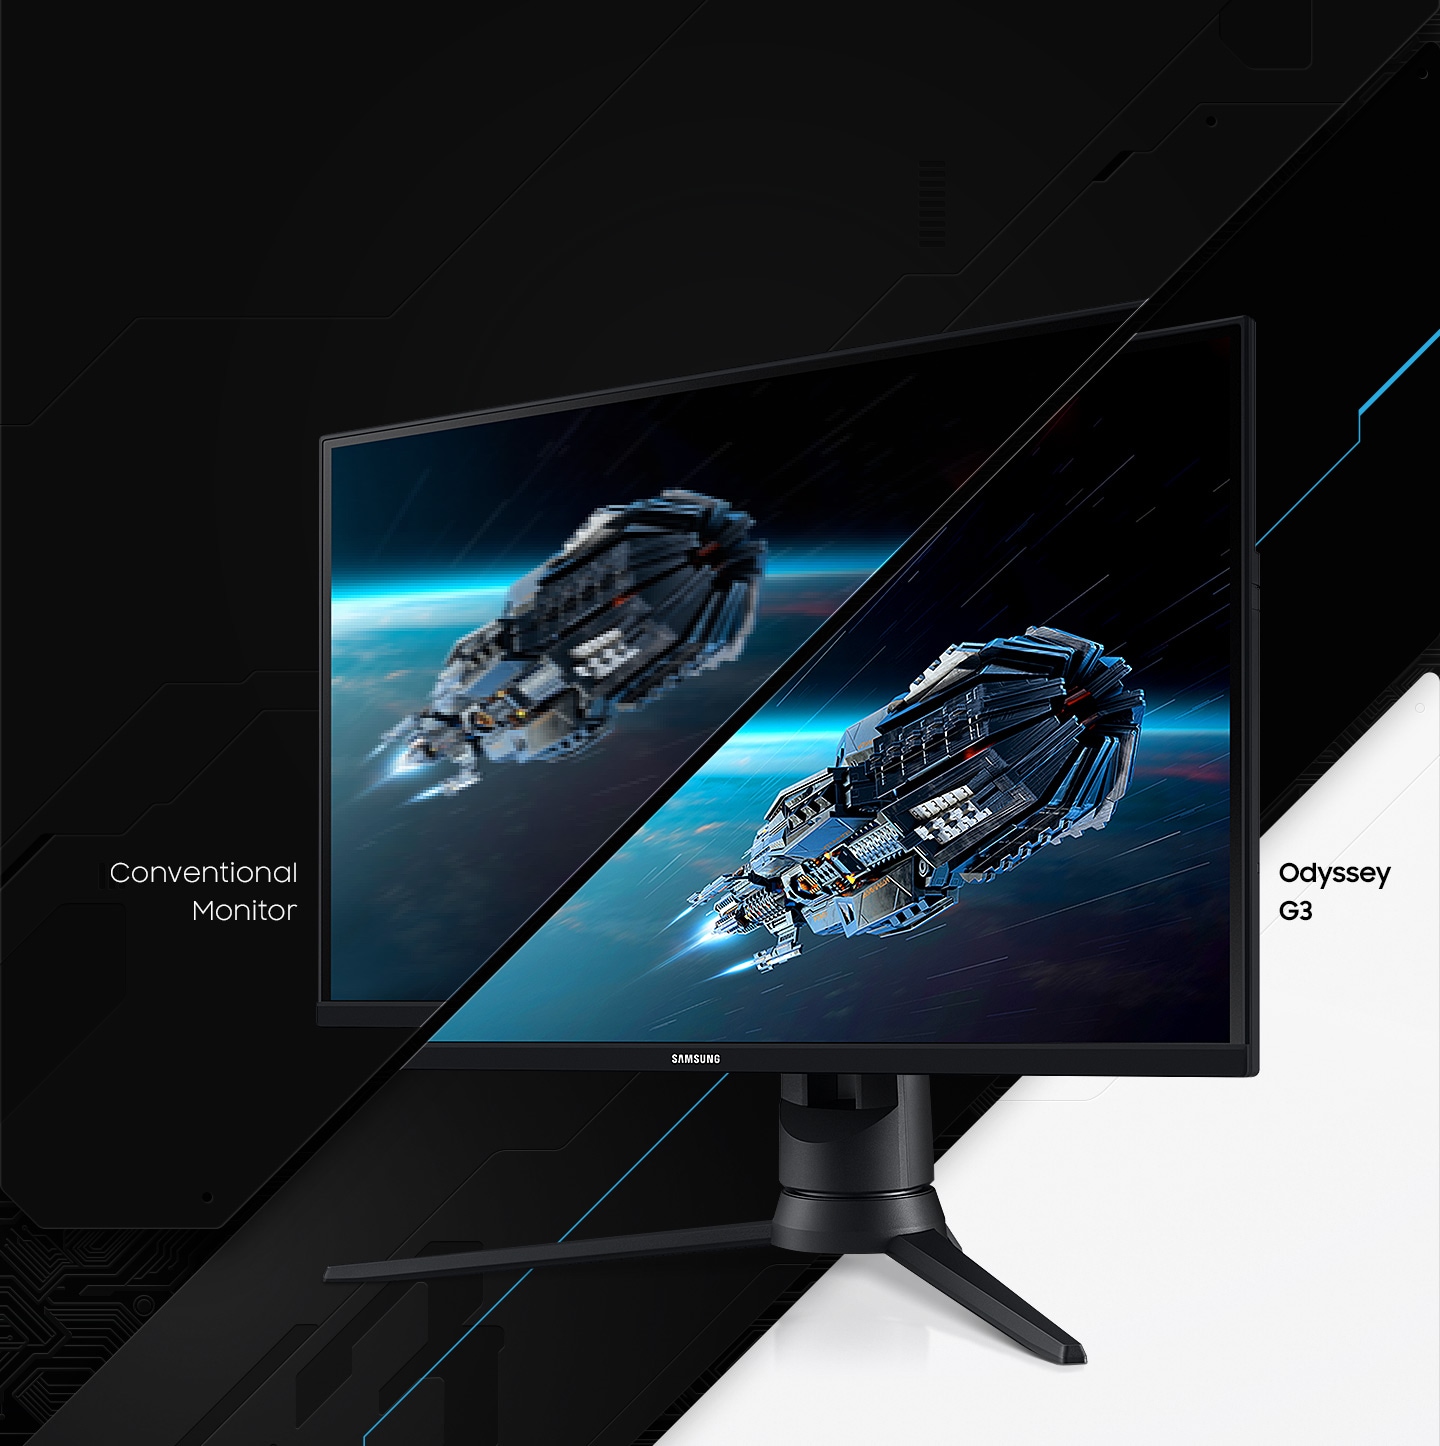 The response time of Odyssey G3 and the conventional monitor are compared by showing the blurry picture on the conventional